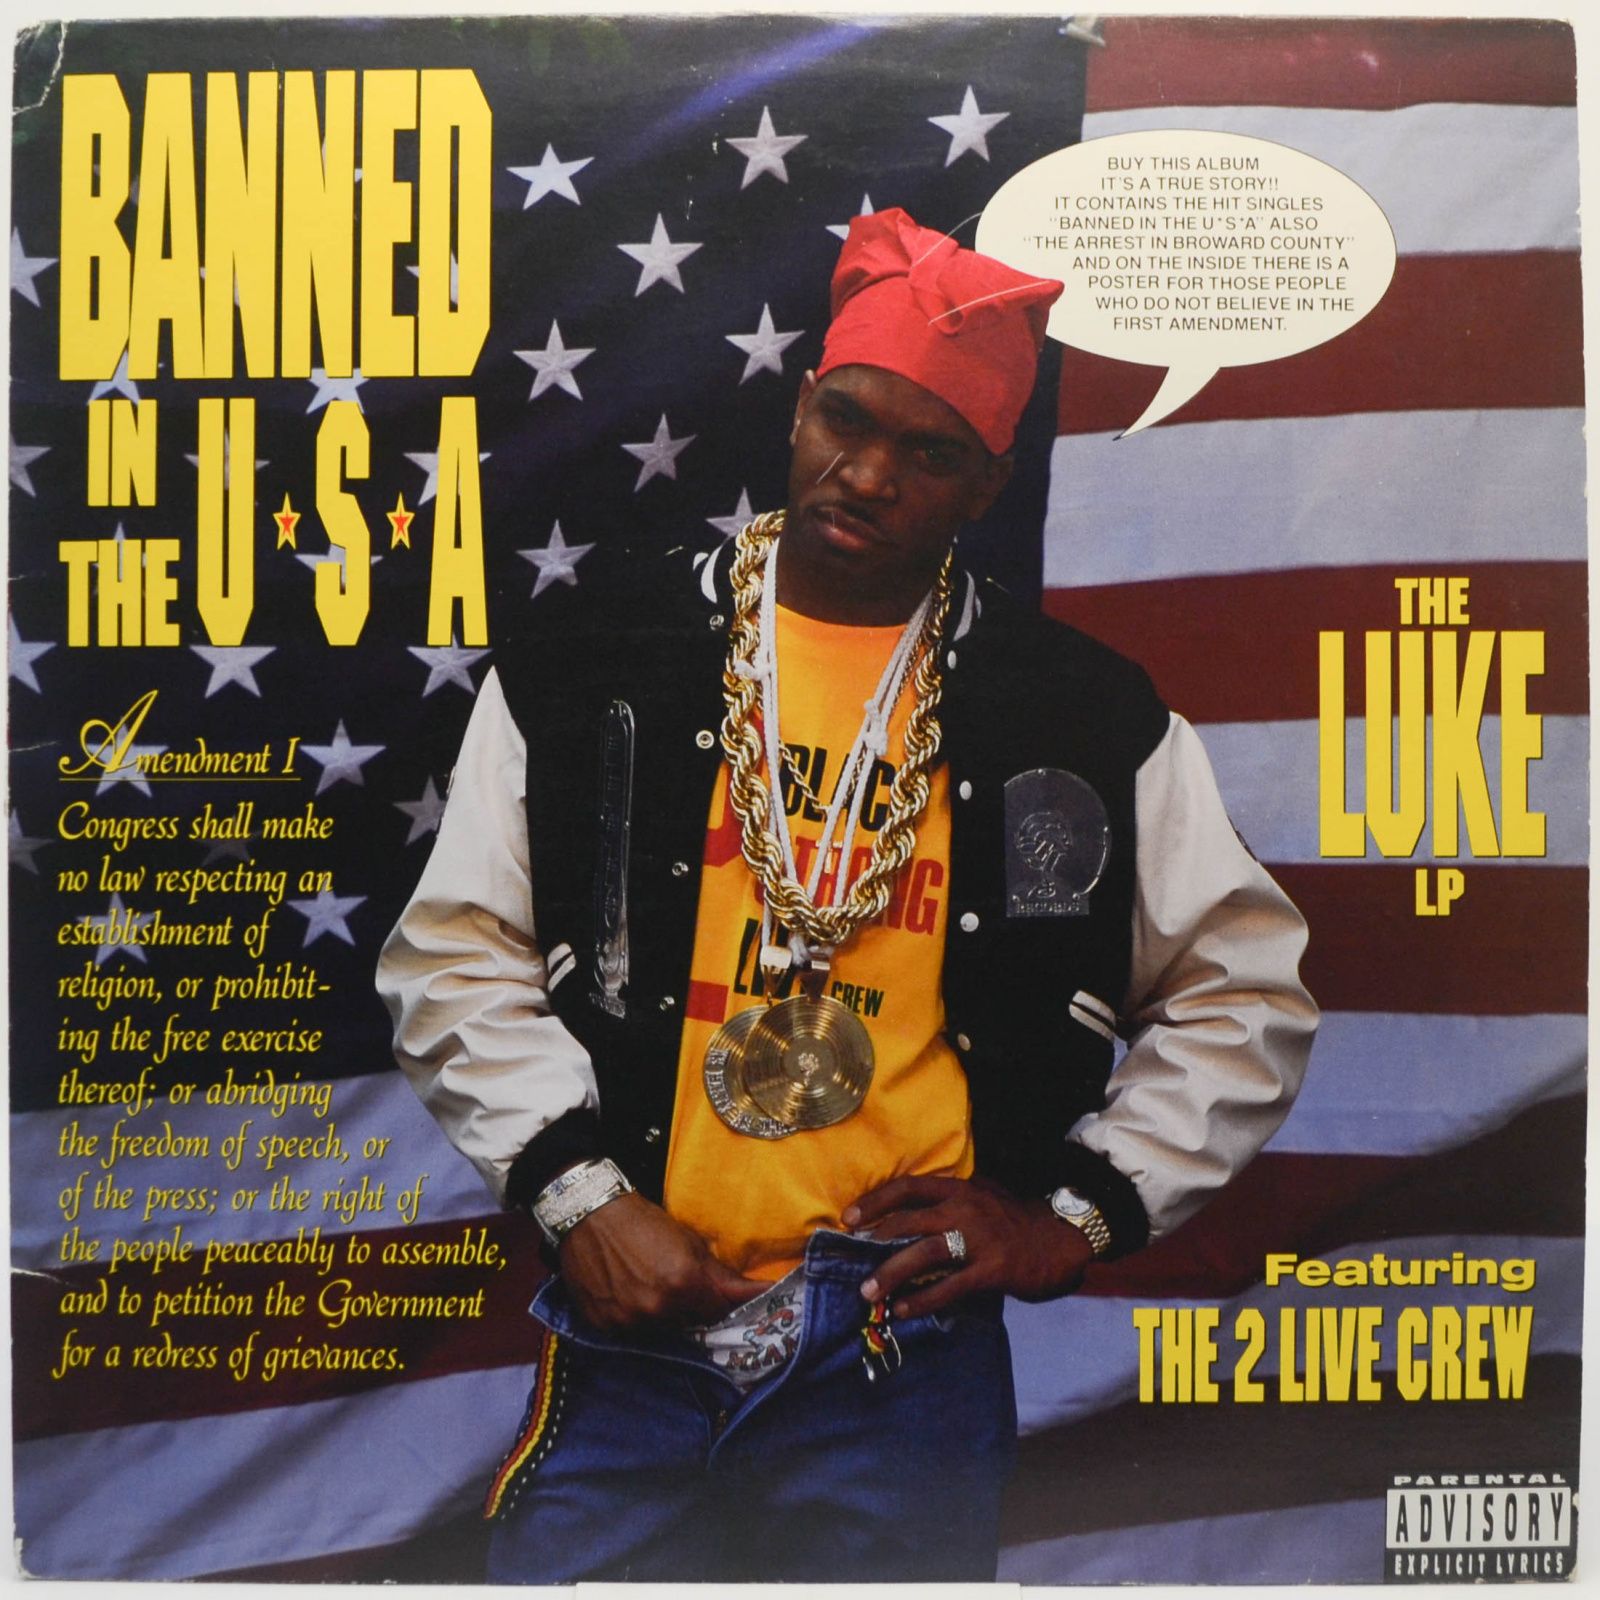 Banned In The U.S.A. - The Luke LP, 1990